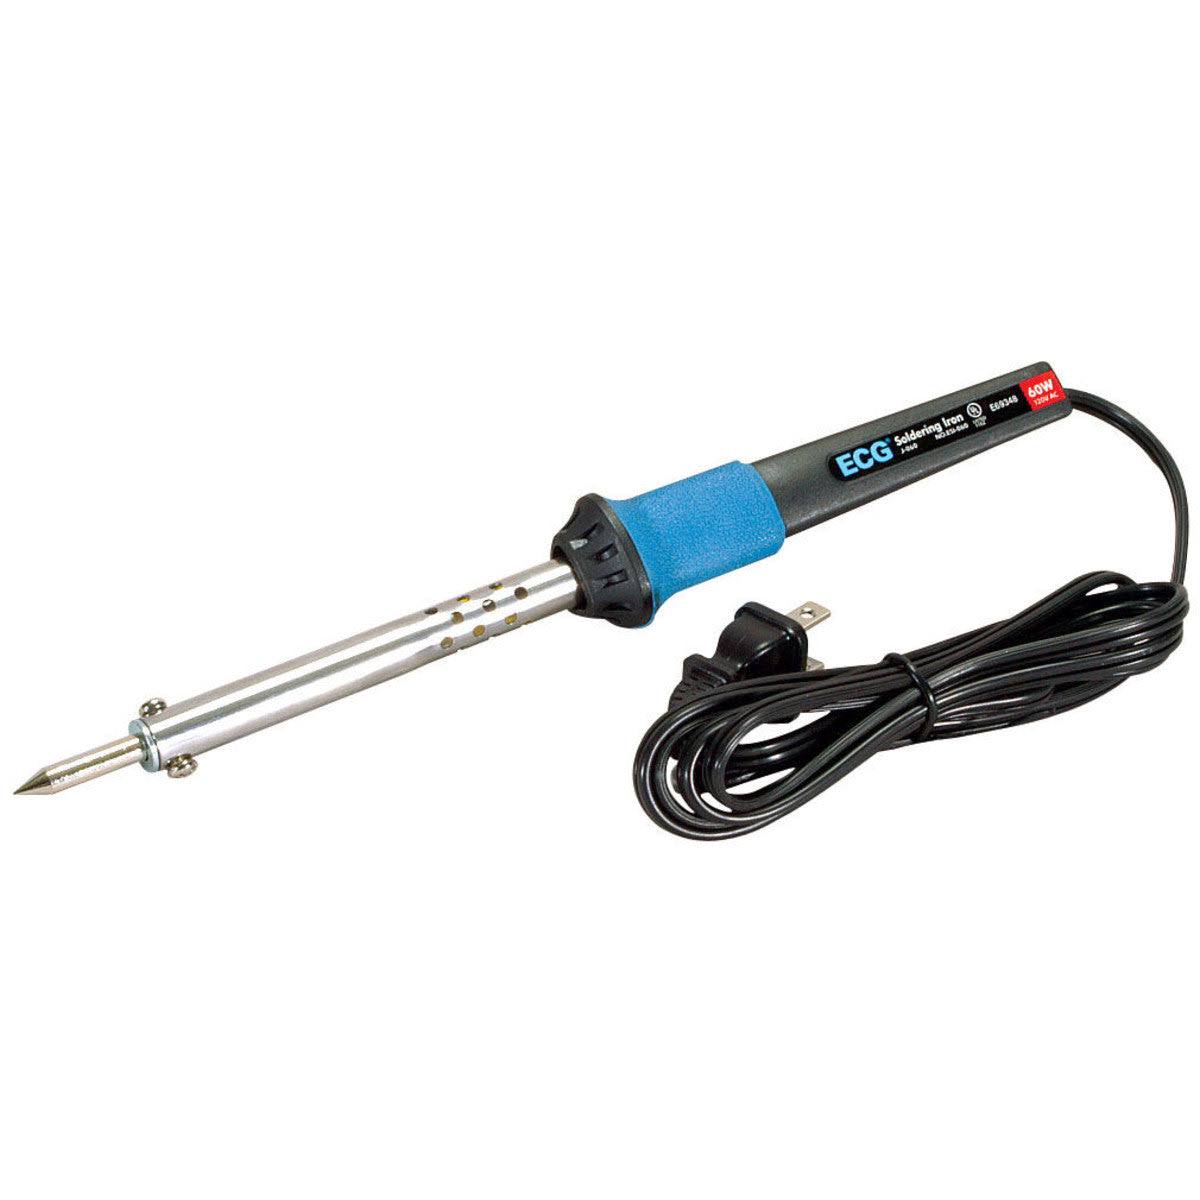 ECG J-060 Electric Corded Soldering Iron - with Conical Needle Tip, 460 Deg C Tip Temperature, 60W